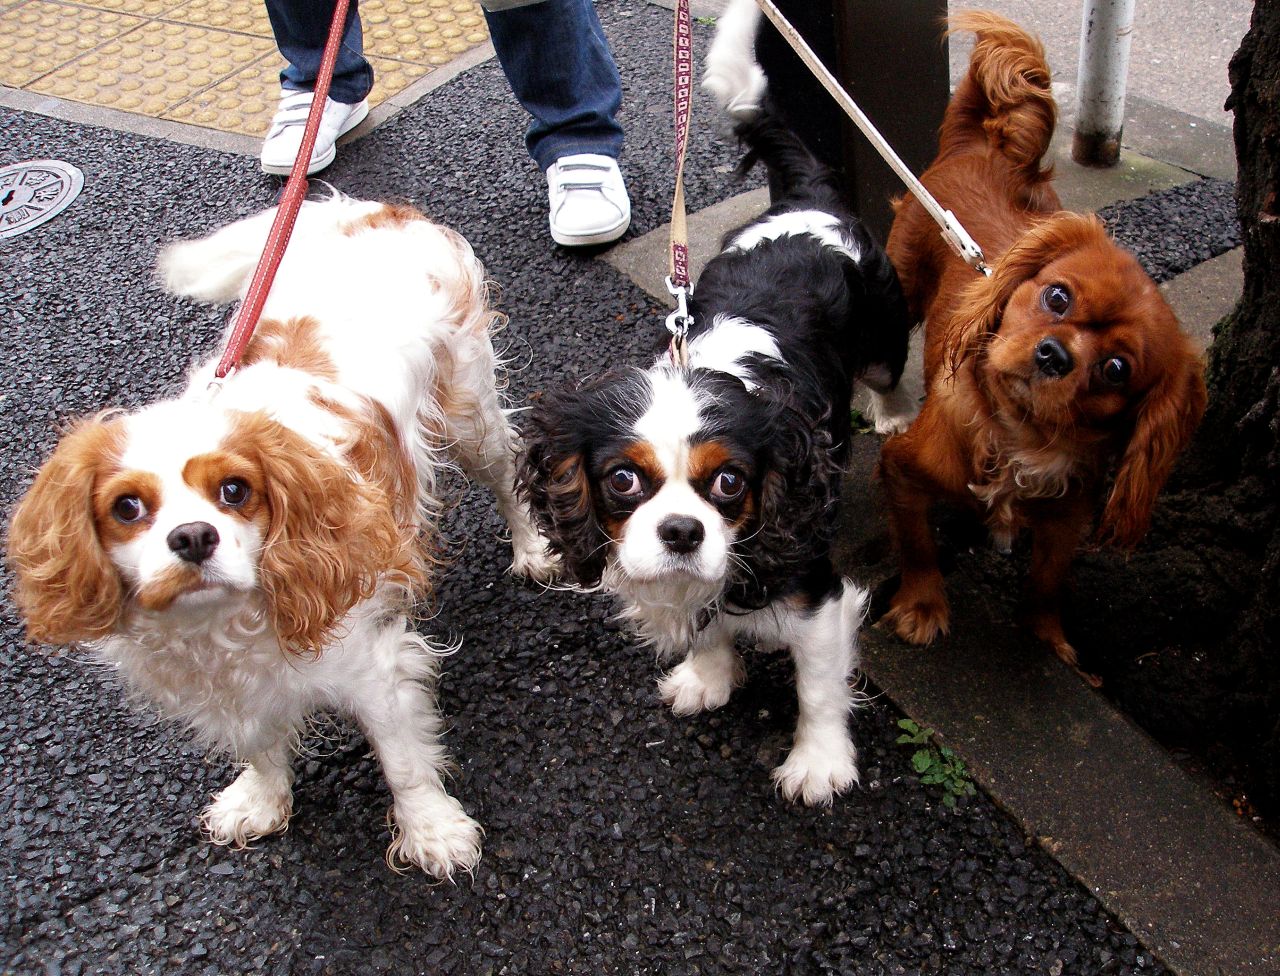 Add photos Three King Charles Spaniel dogs in your blog: